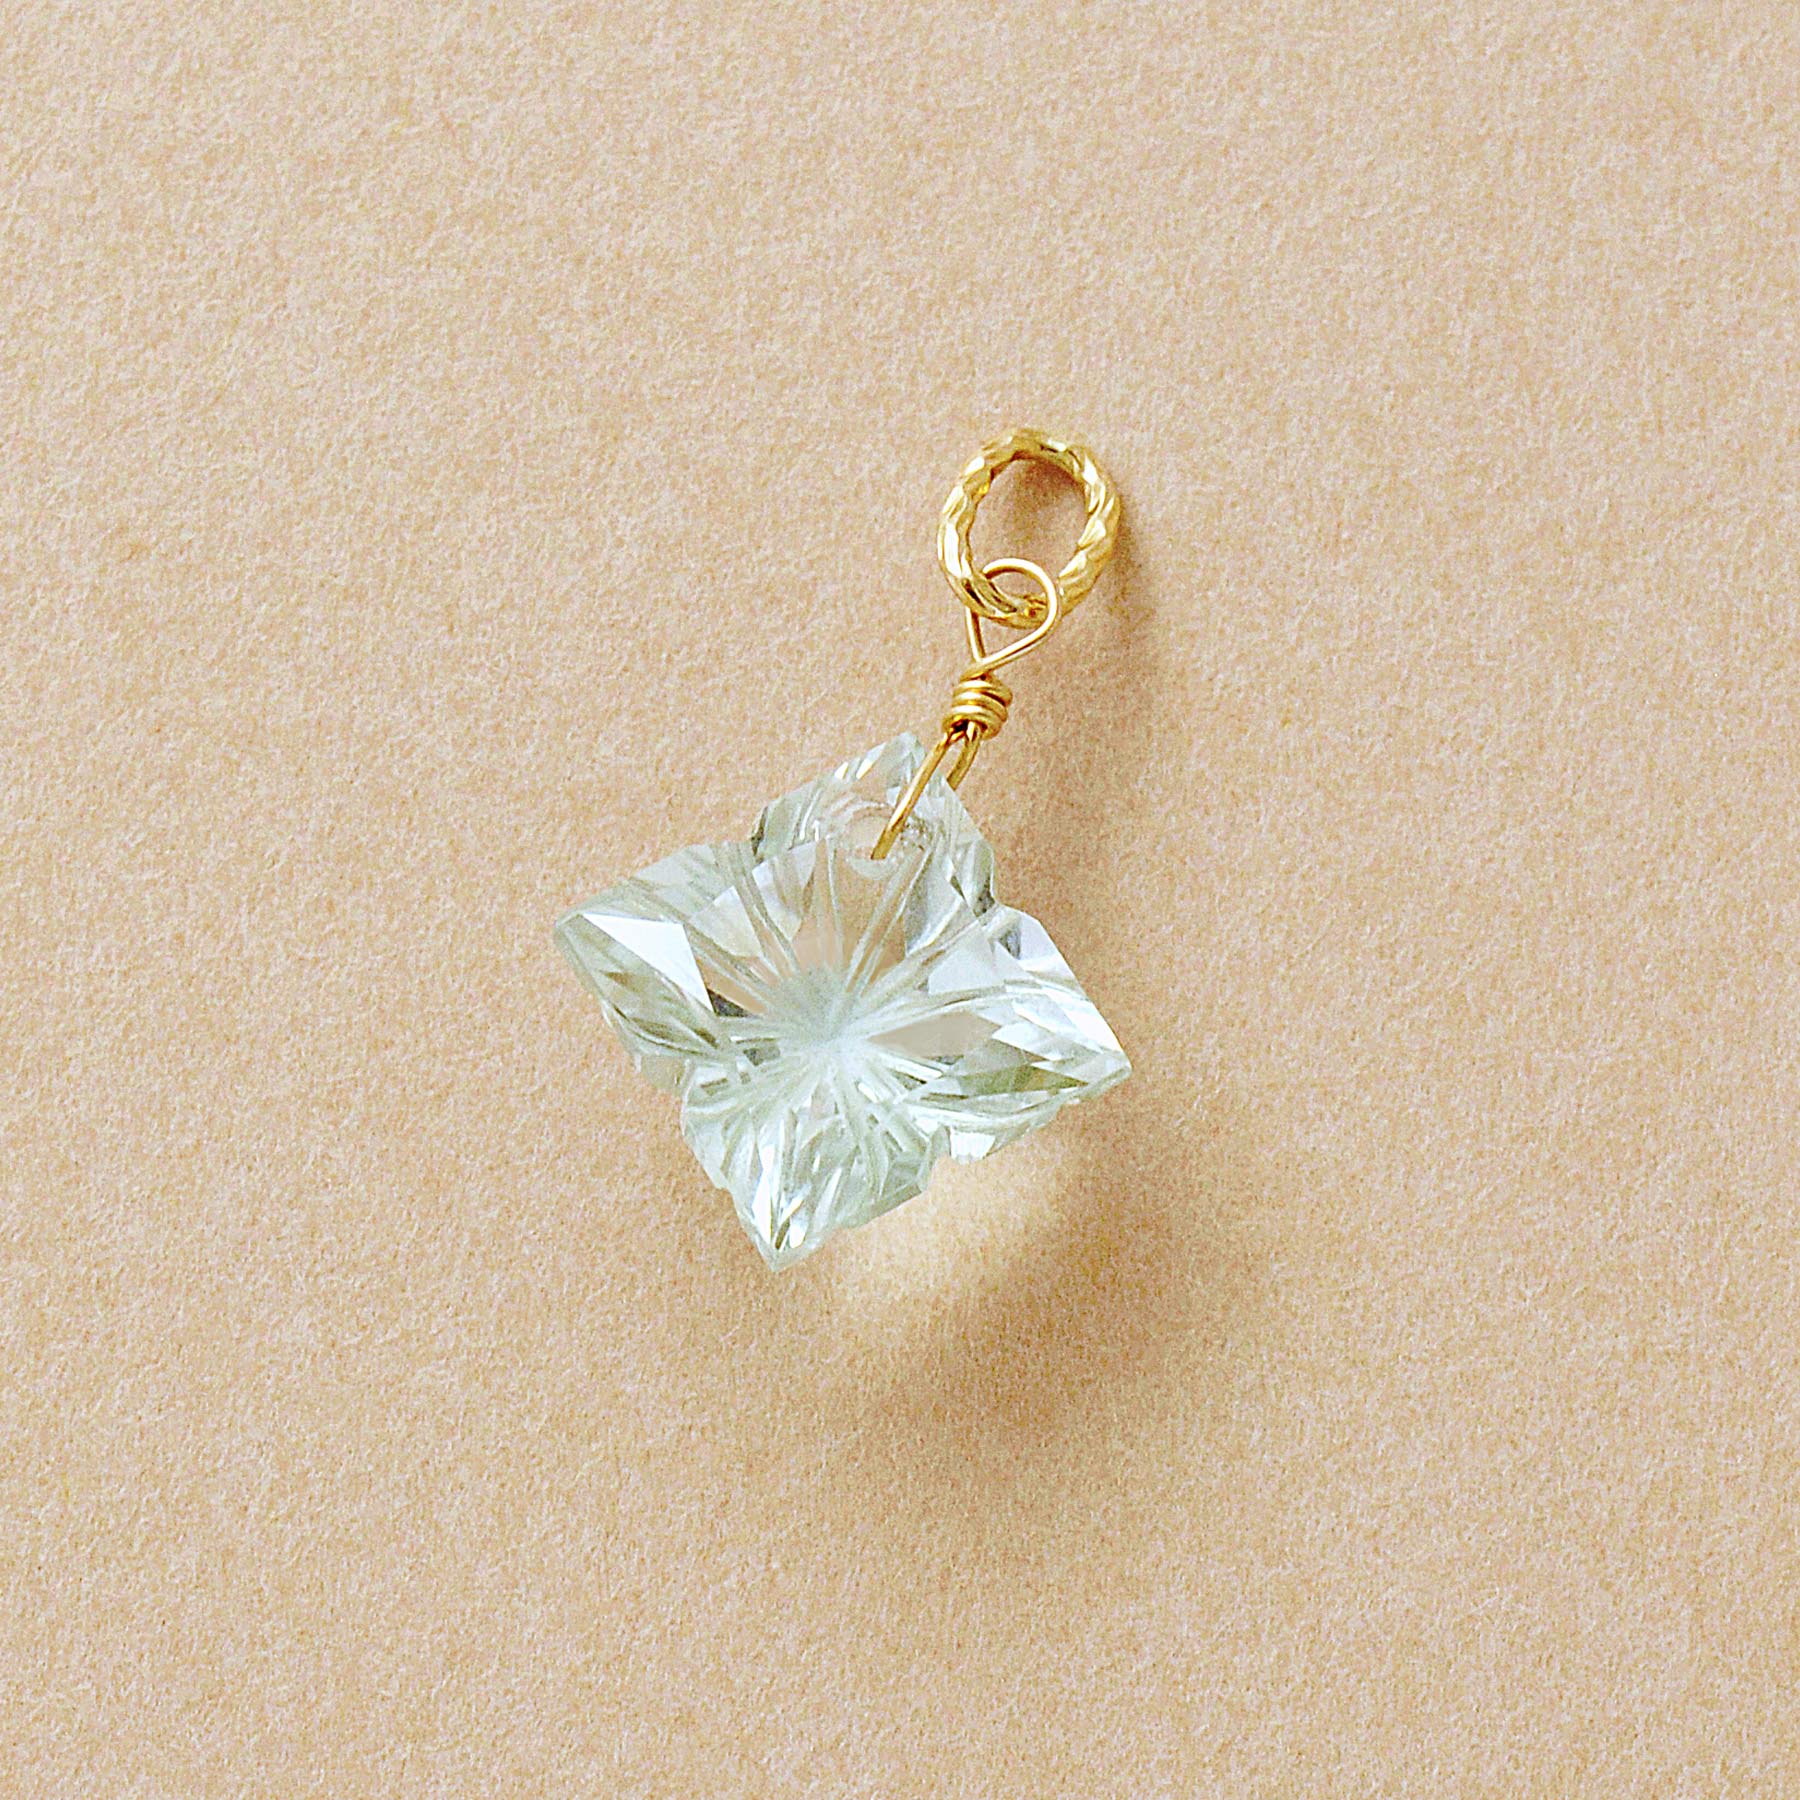 10K Green Quartz Necklace Charm (Yellow Gold) - Product Image